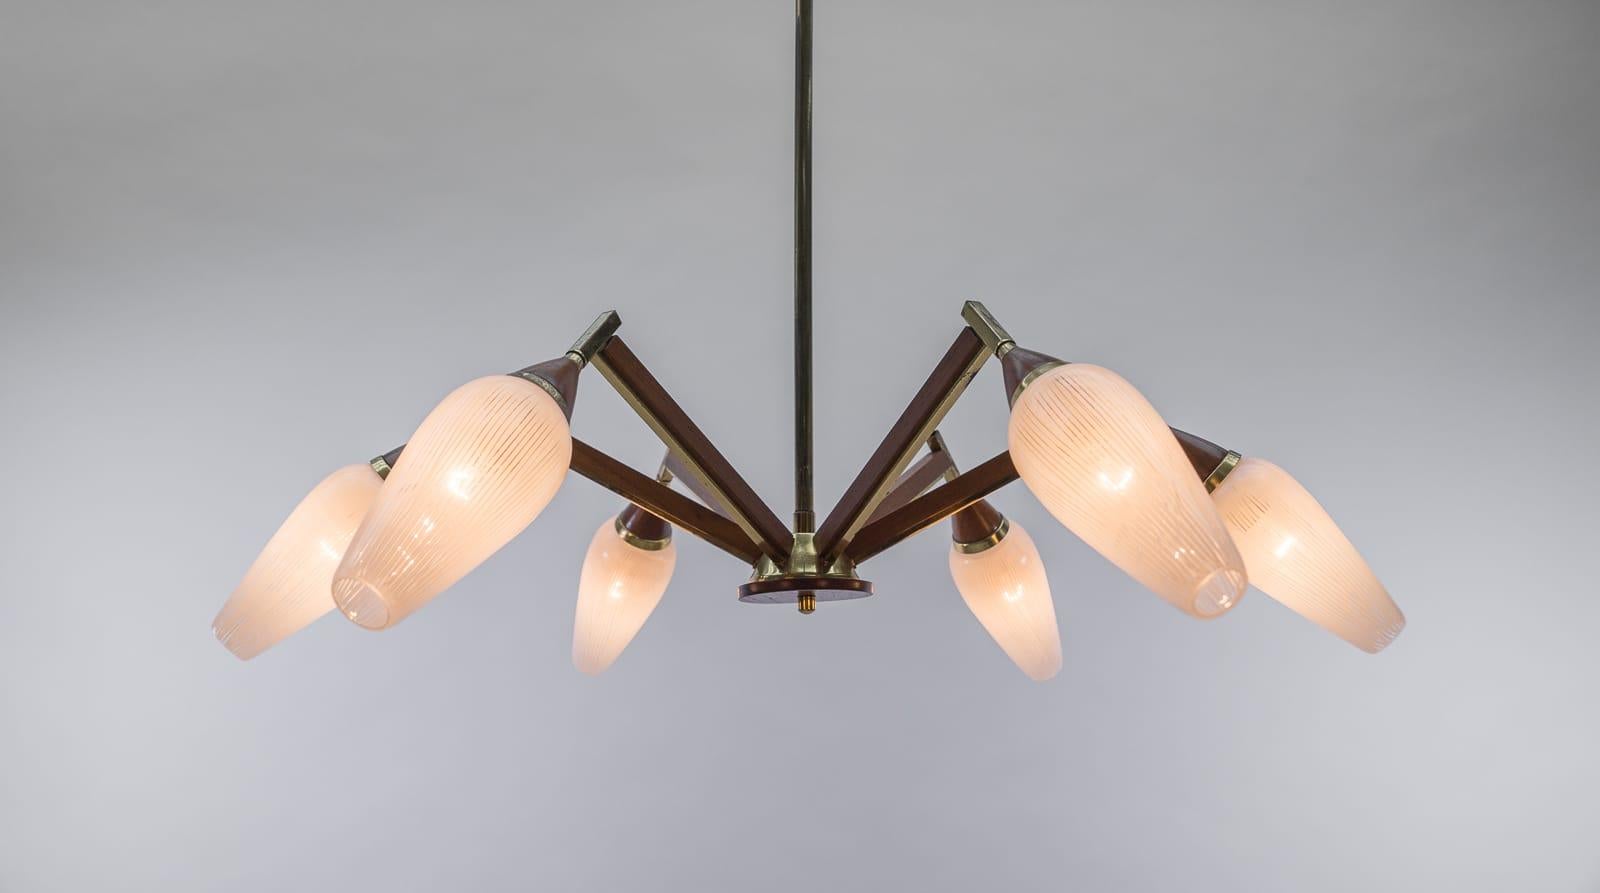 Ceiling 6-Light Sputnik Lamp in Teak, Brass and Glass, 1950s In Good Condition For Sale In Nürnberg, Bayern